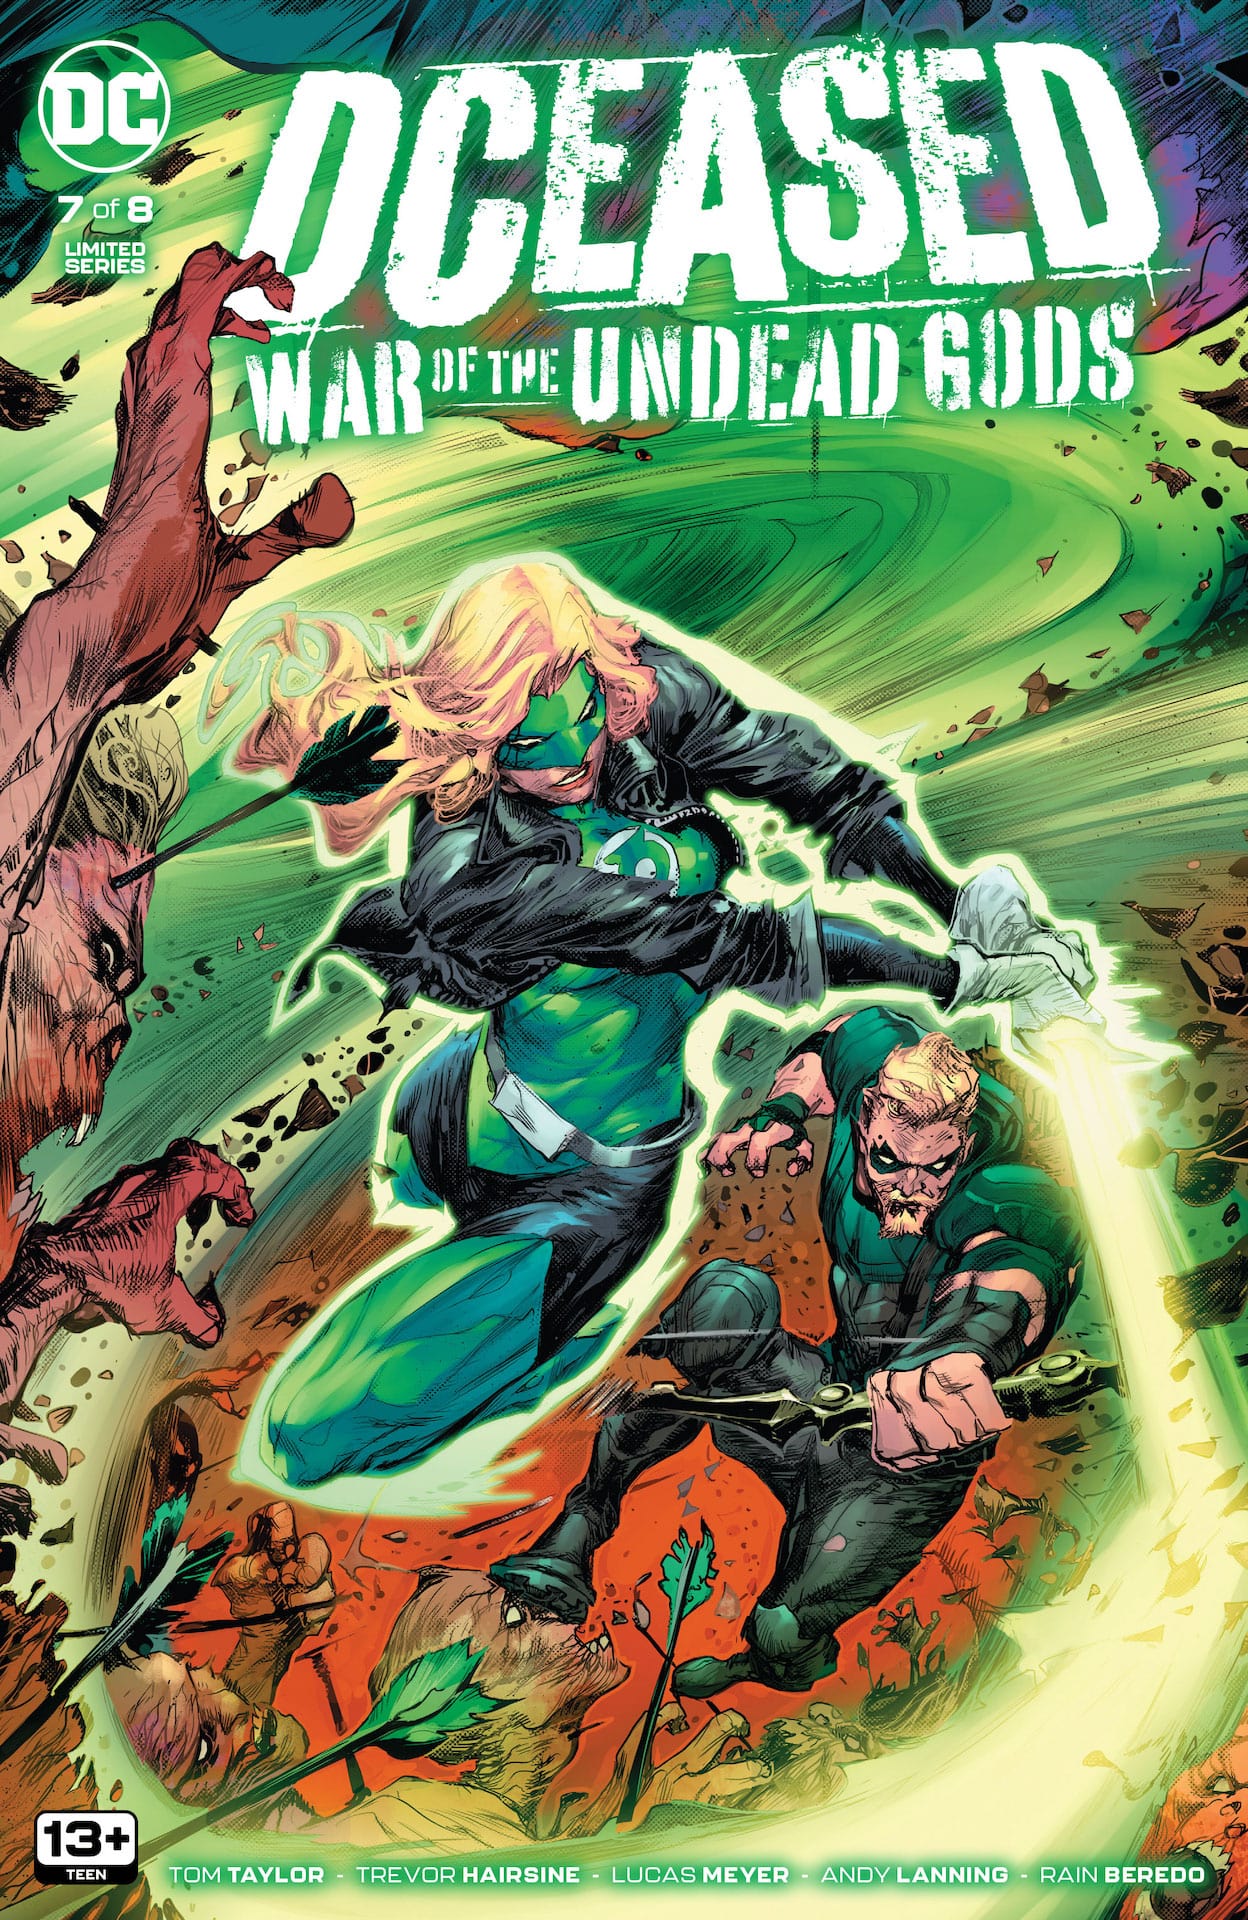 DC Preview: DCeased: War of the Undead Gods #7